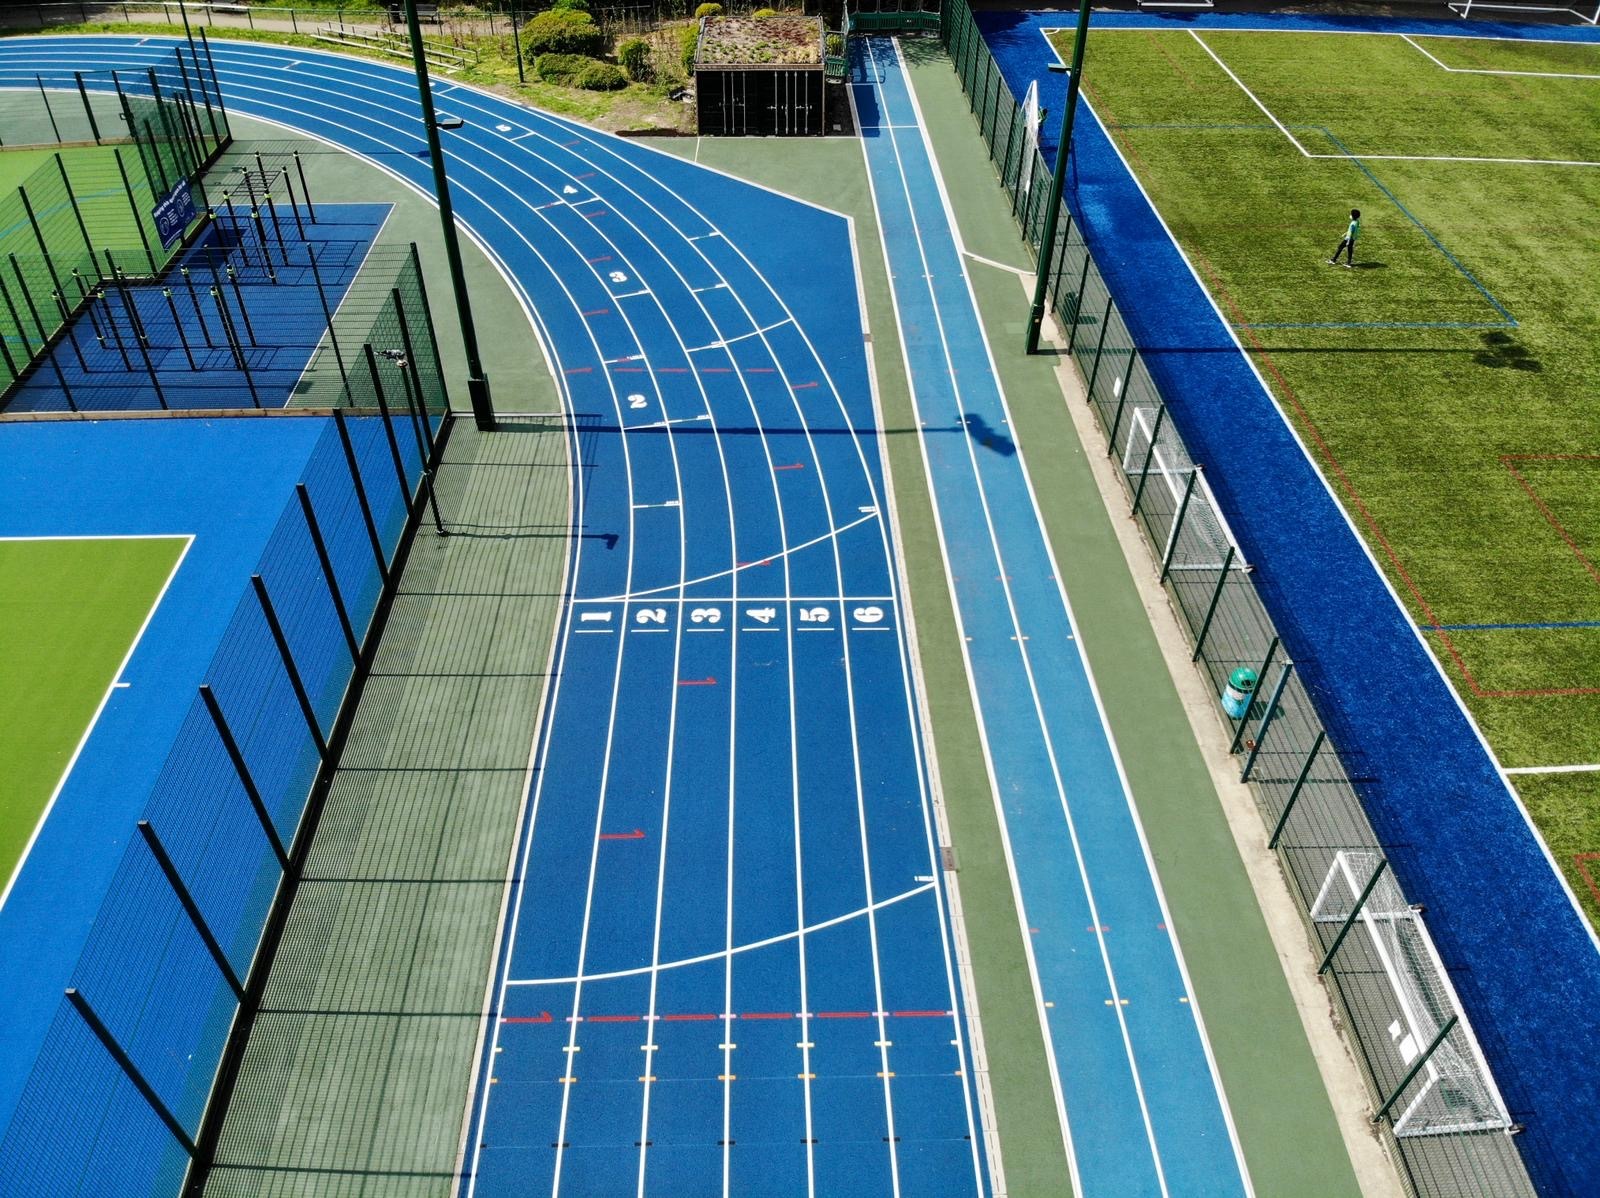 ETC Sports Surfaces Ltd selected a Stobitan® SC polymeric surface manufactured by Stockmeier Group.